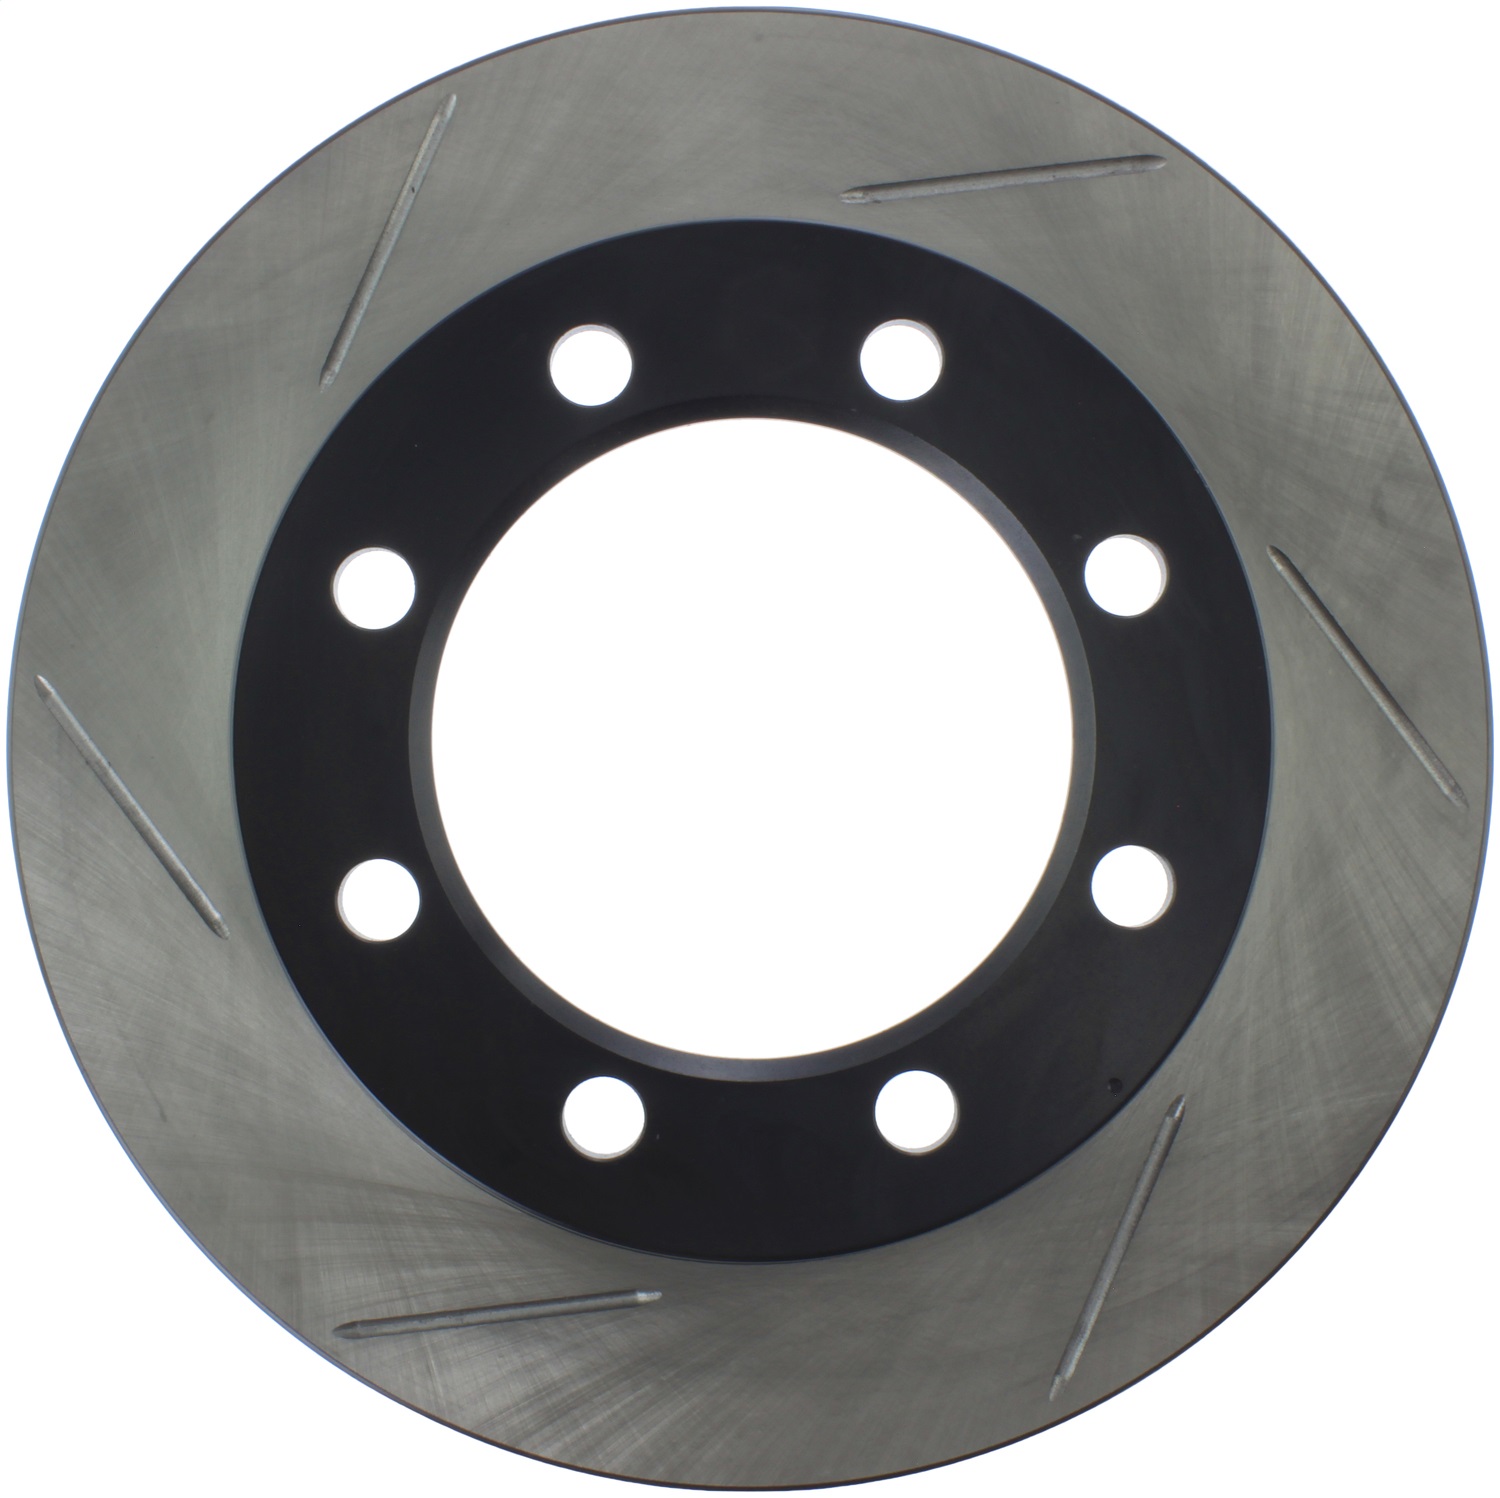 StopTech 126.65053SR Sport Slotted Disc Brake Rotor Fits F-250 F-250 HD F-350